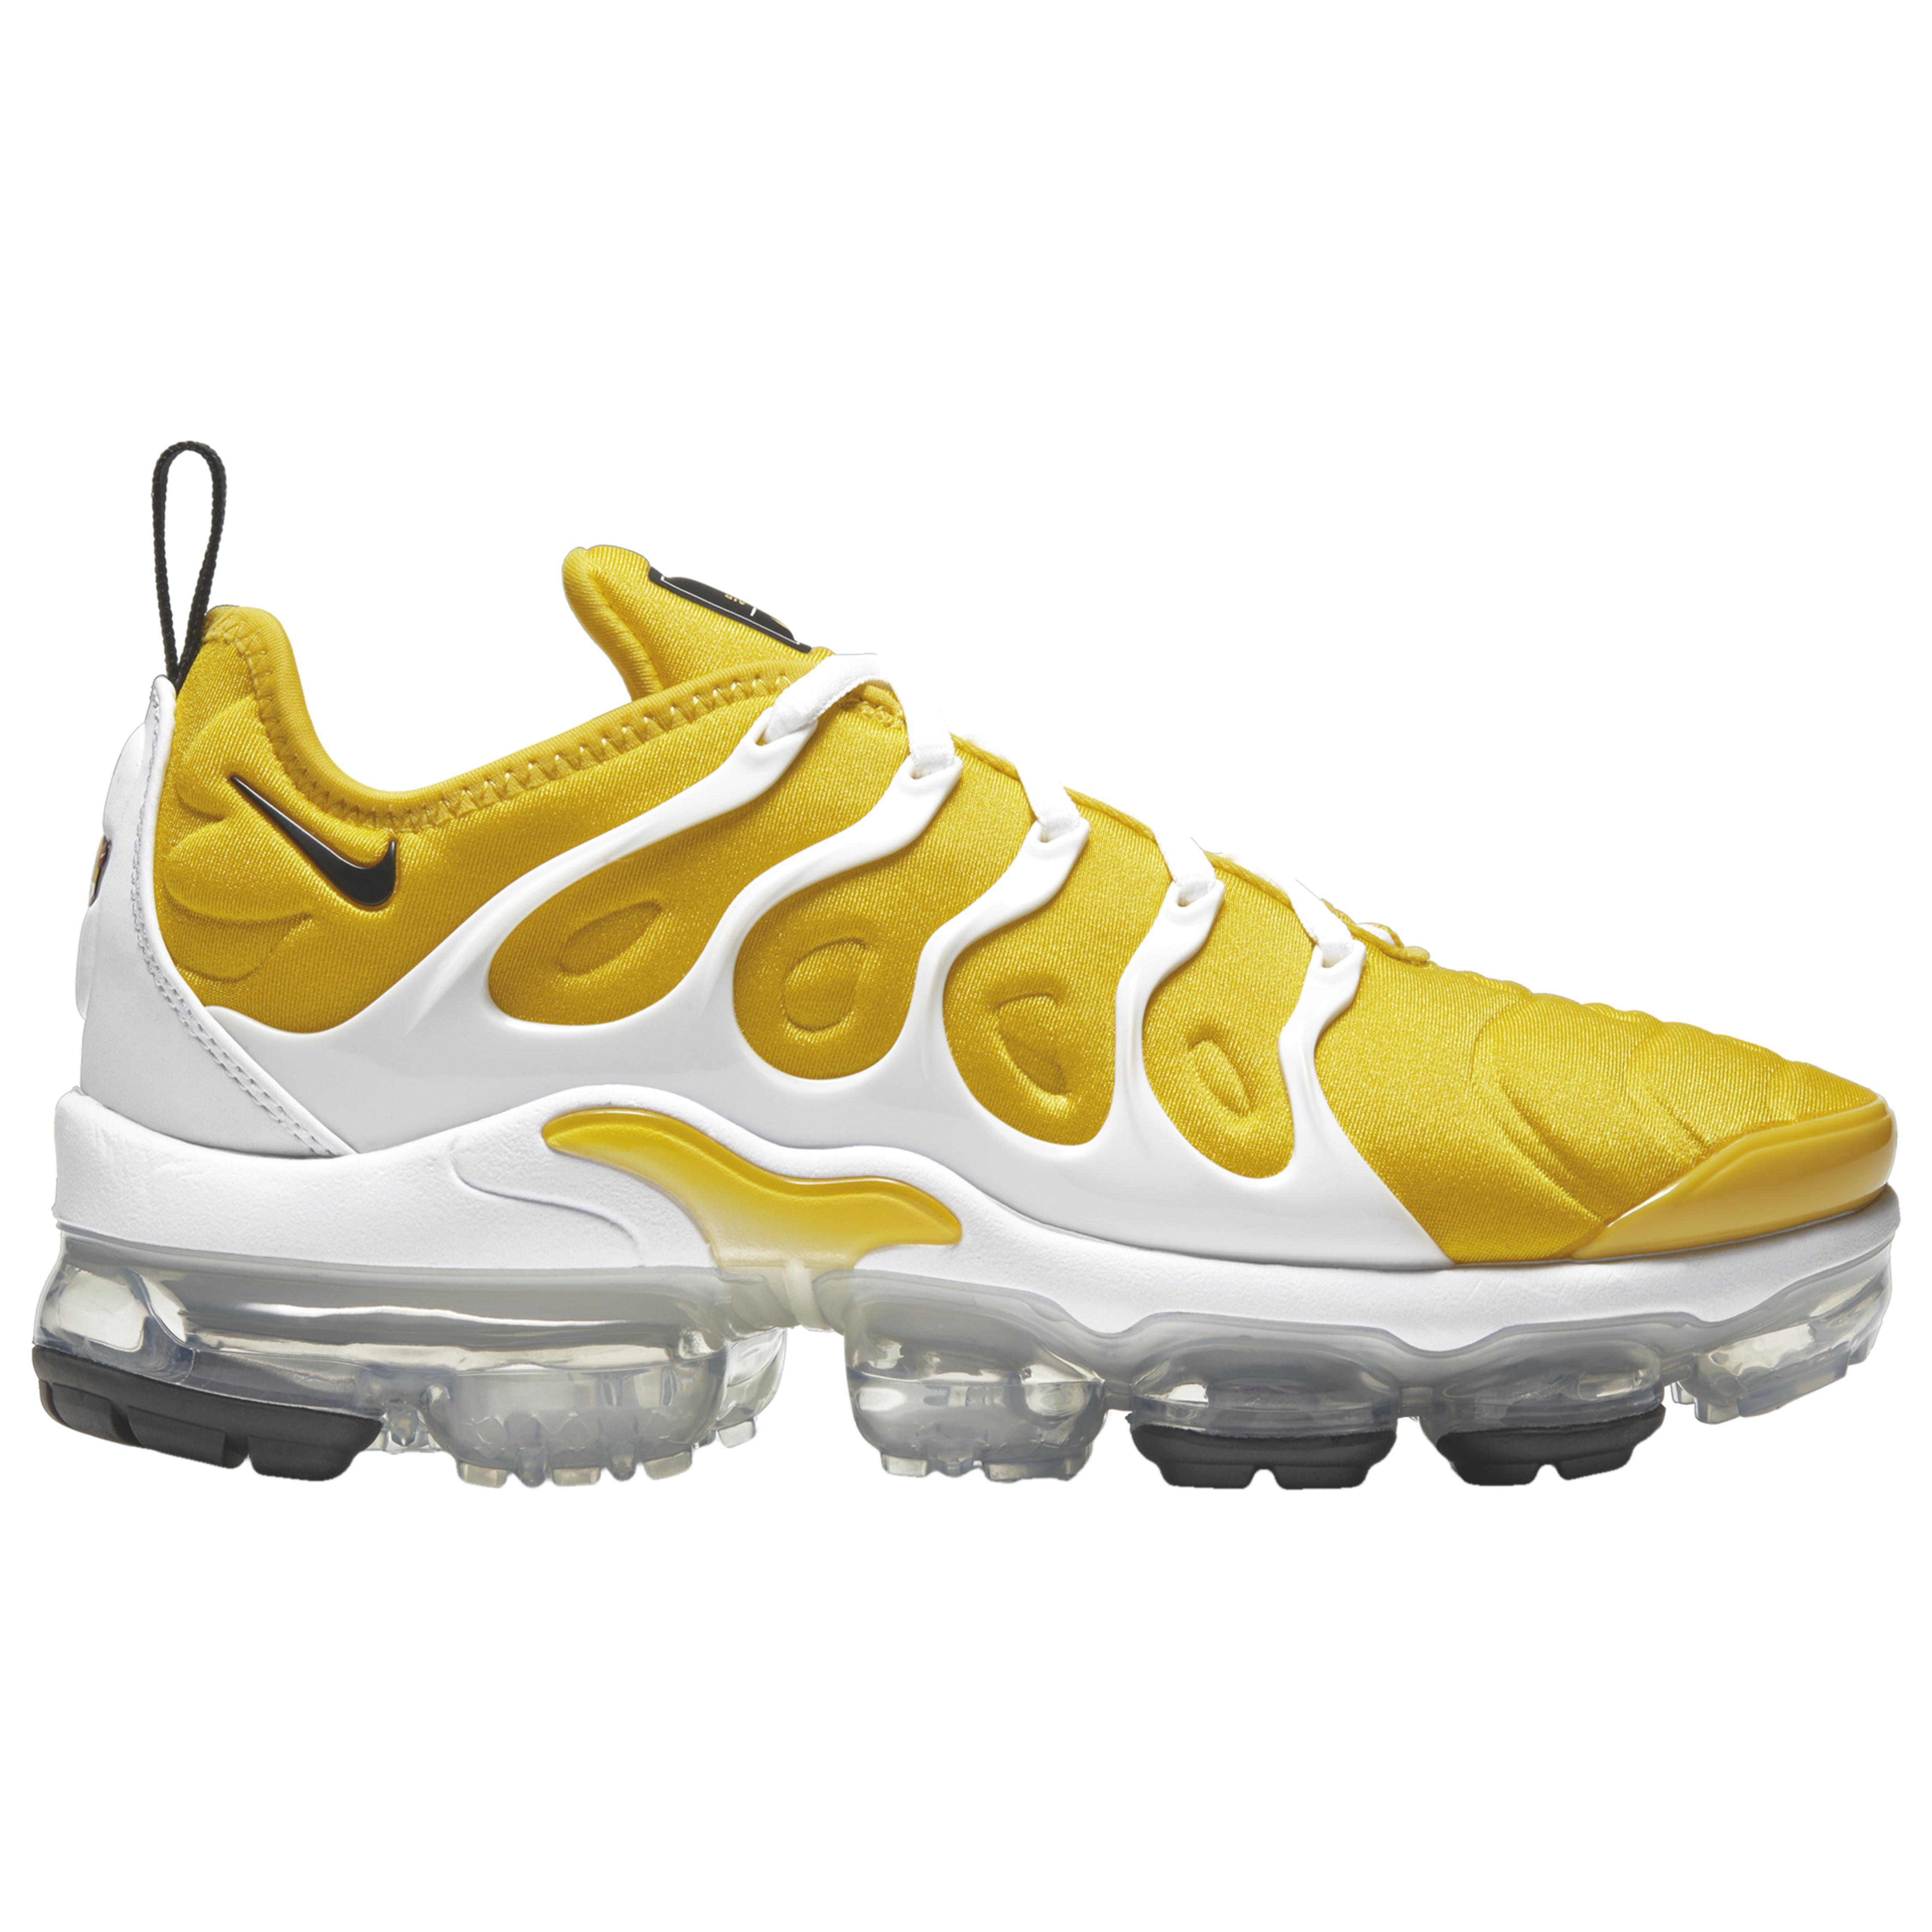 Nike Synthetic Air Vapormax Plus Shoes 